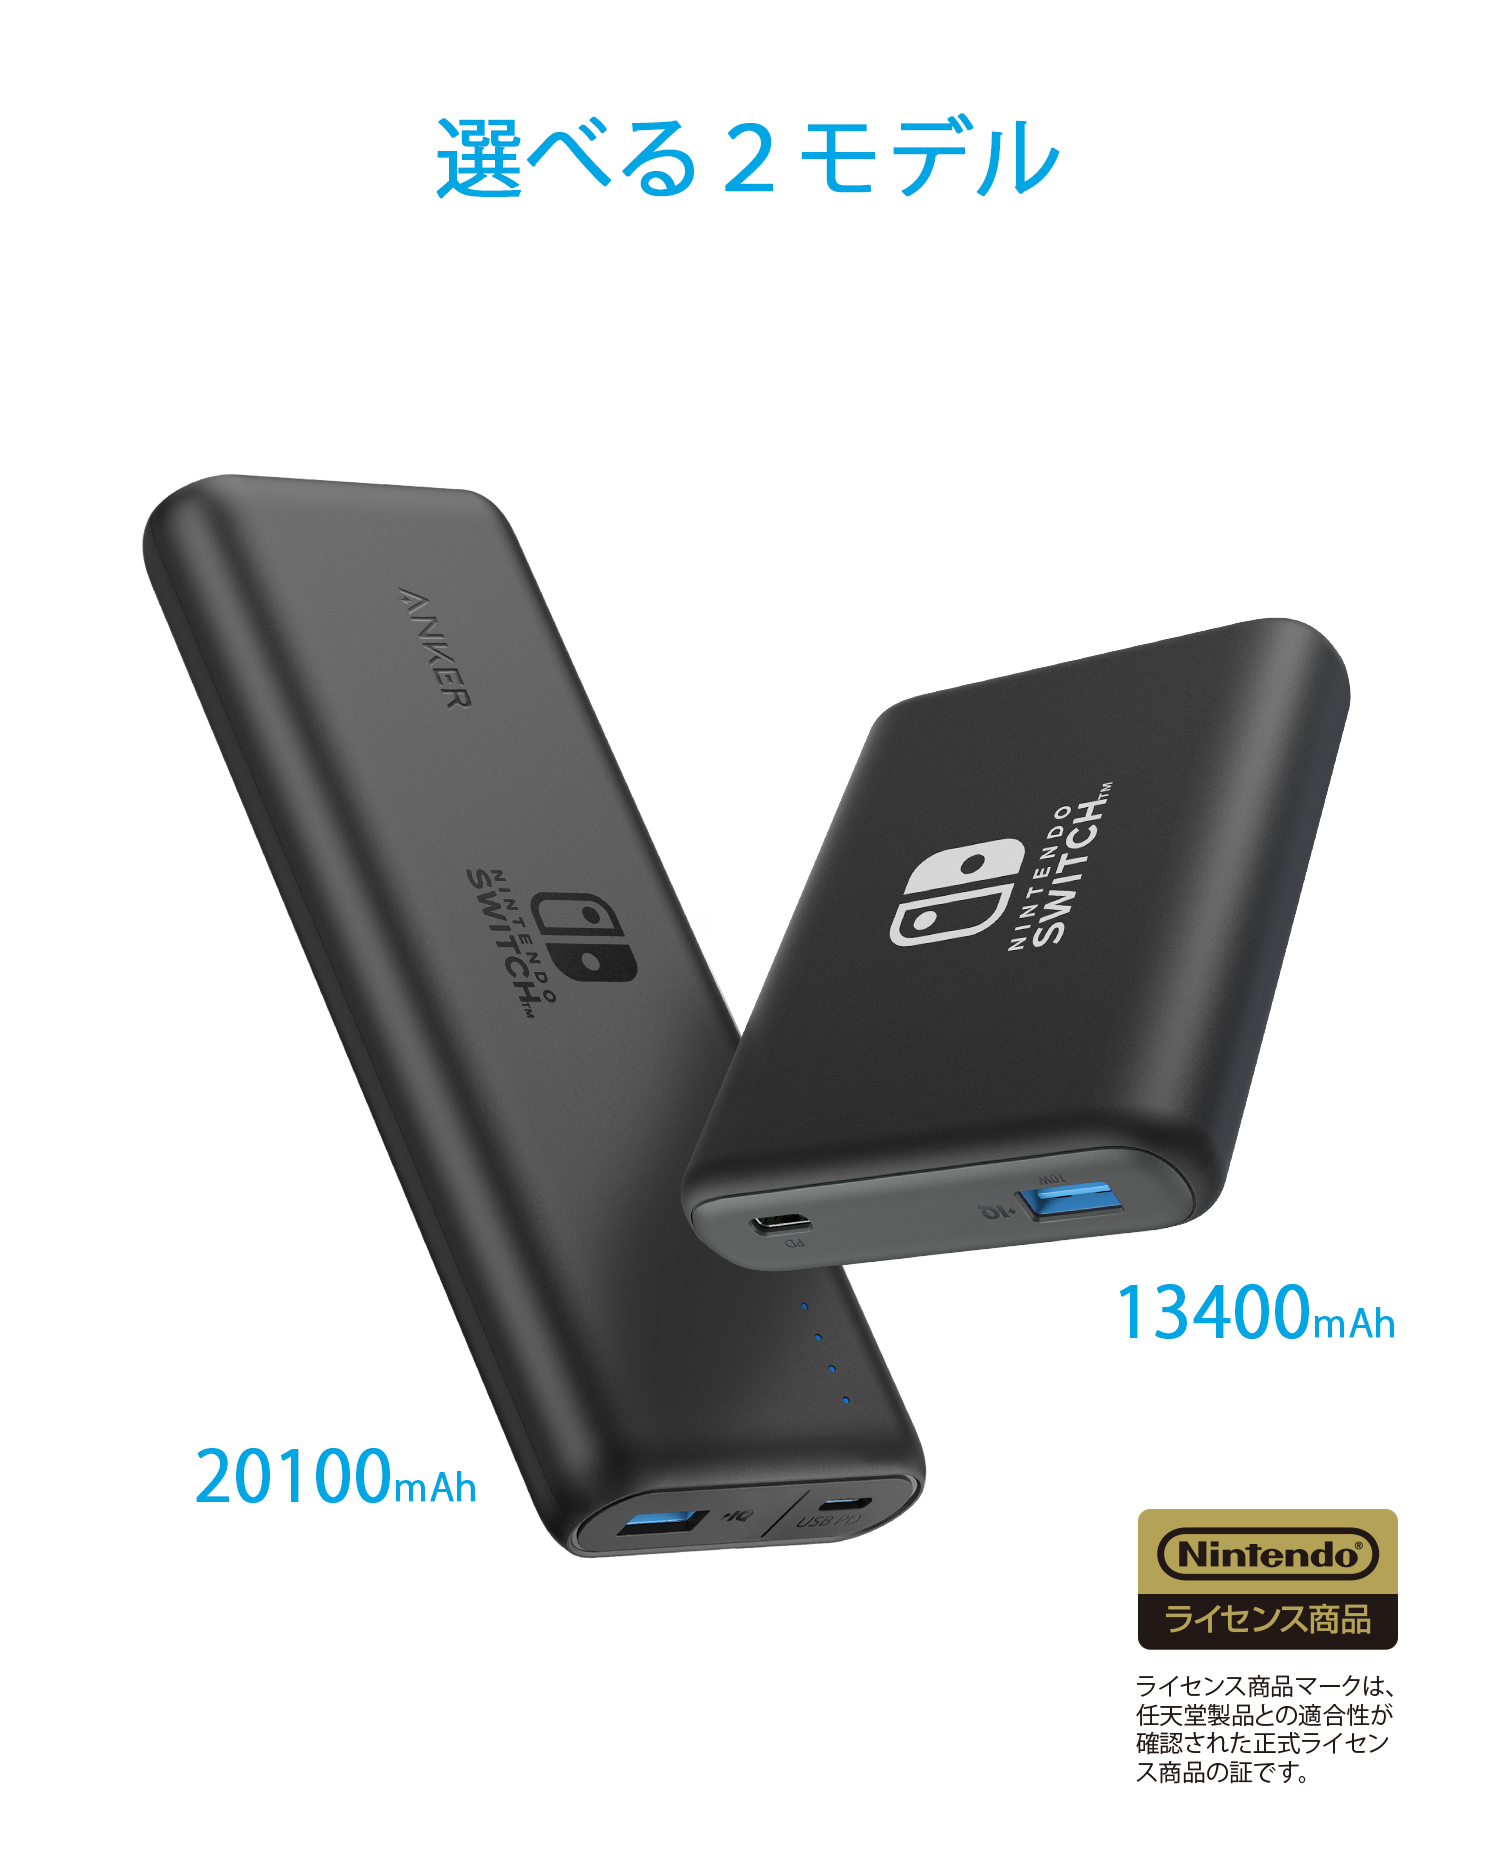 Anker releases officially licensed Switch power banks/portable | The Archives | GoNintendo